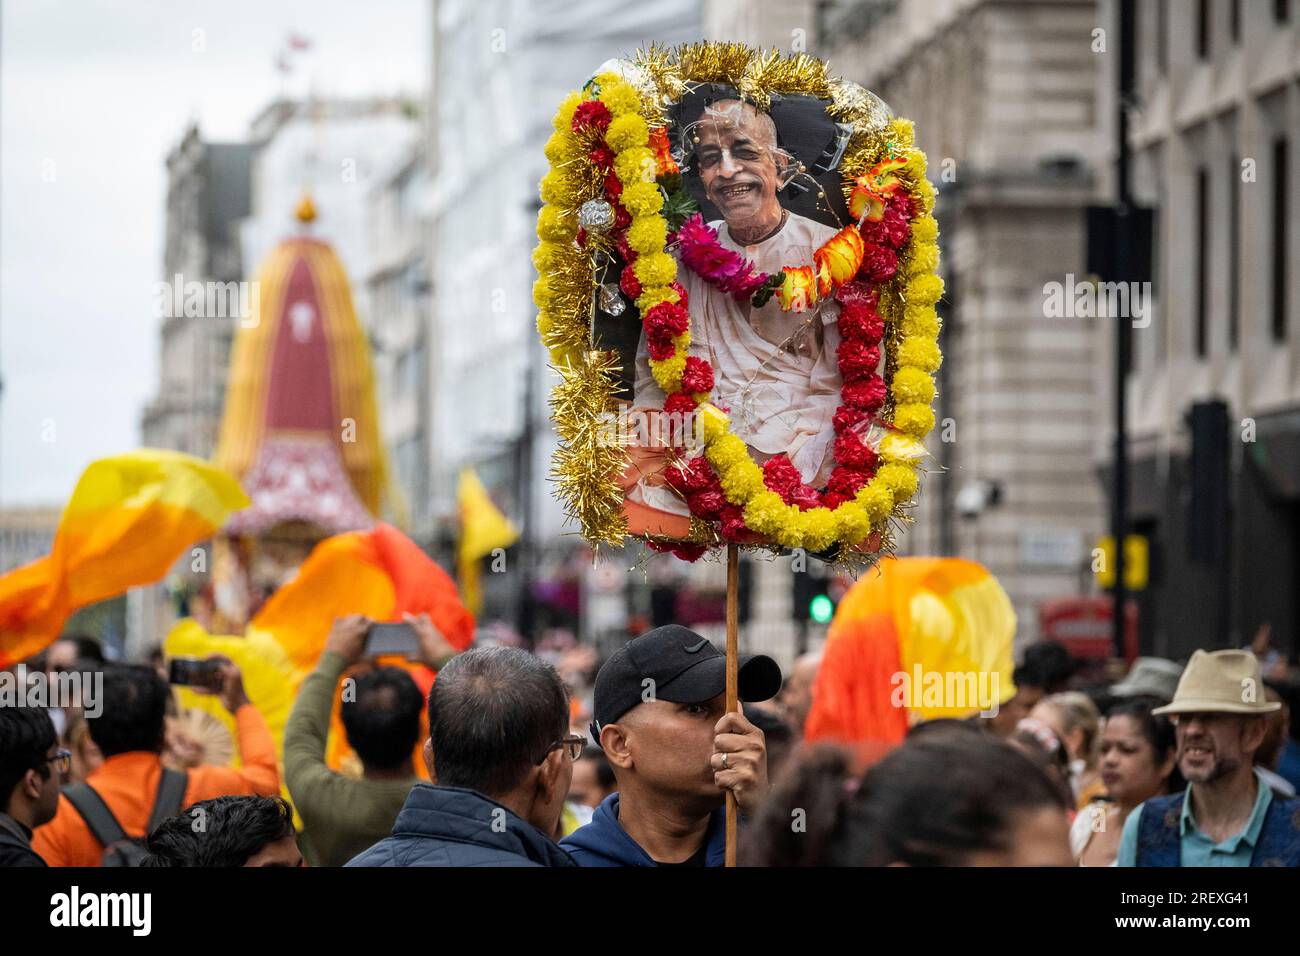 London, UK.  30 July 2023.  Hare Krishna devotees with a sign showing their founder Bhaktivedanta Swani Prabhupada during the Rathayatra Festival, or Festival of the Chariots, pass through Piccadilly.  Usually three decorated chariots, carrying the deity forms of Jagannatha, Baladeva and Subhadra, are wheeled from Hyde Park to Trafalgar Square, but this year due to space restrictions in the square, only one chariot is permitted.  Once in the square, devotees enjoy free vegetarian food and refreshments during the festival.   Credit: Stephen Chung / Alamy Live News Stock Photo